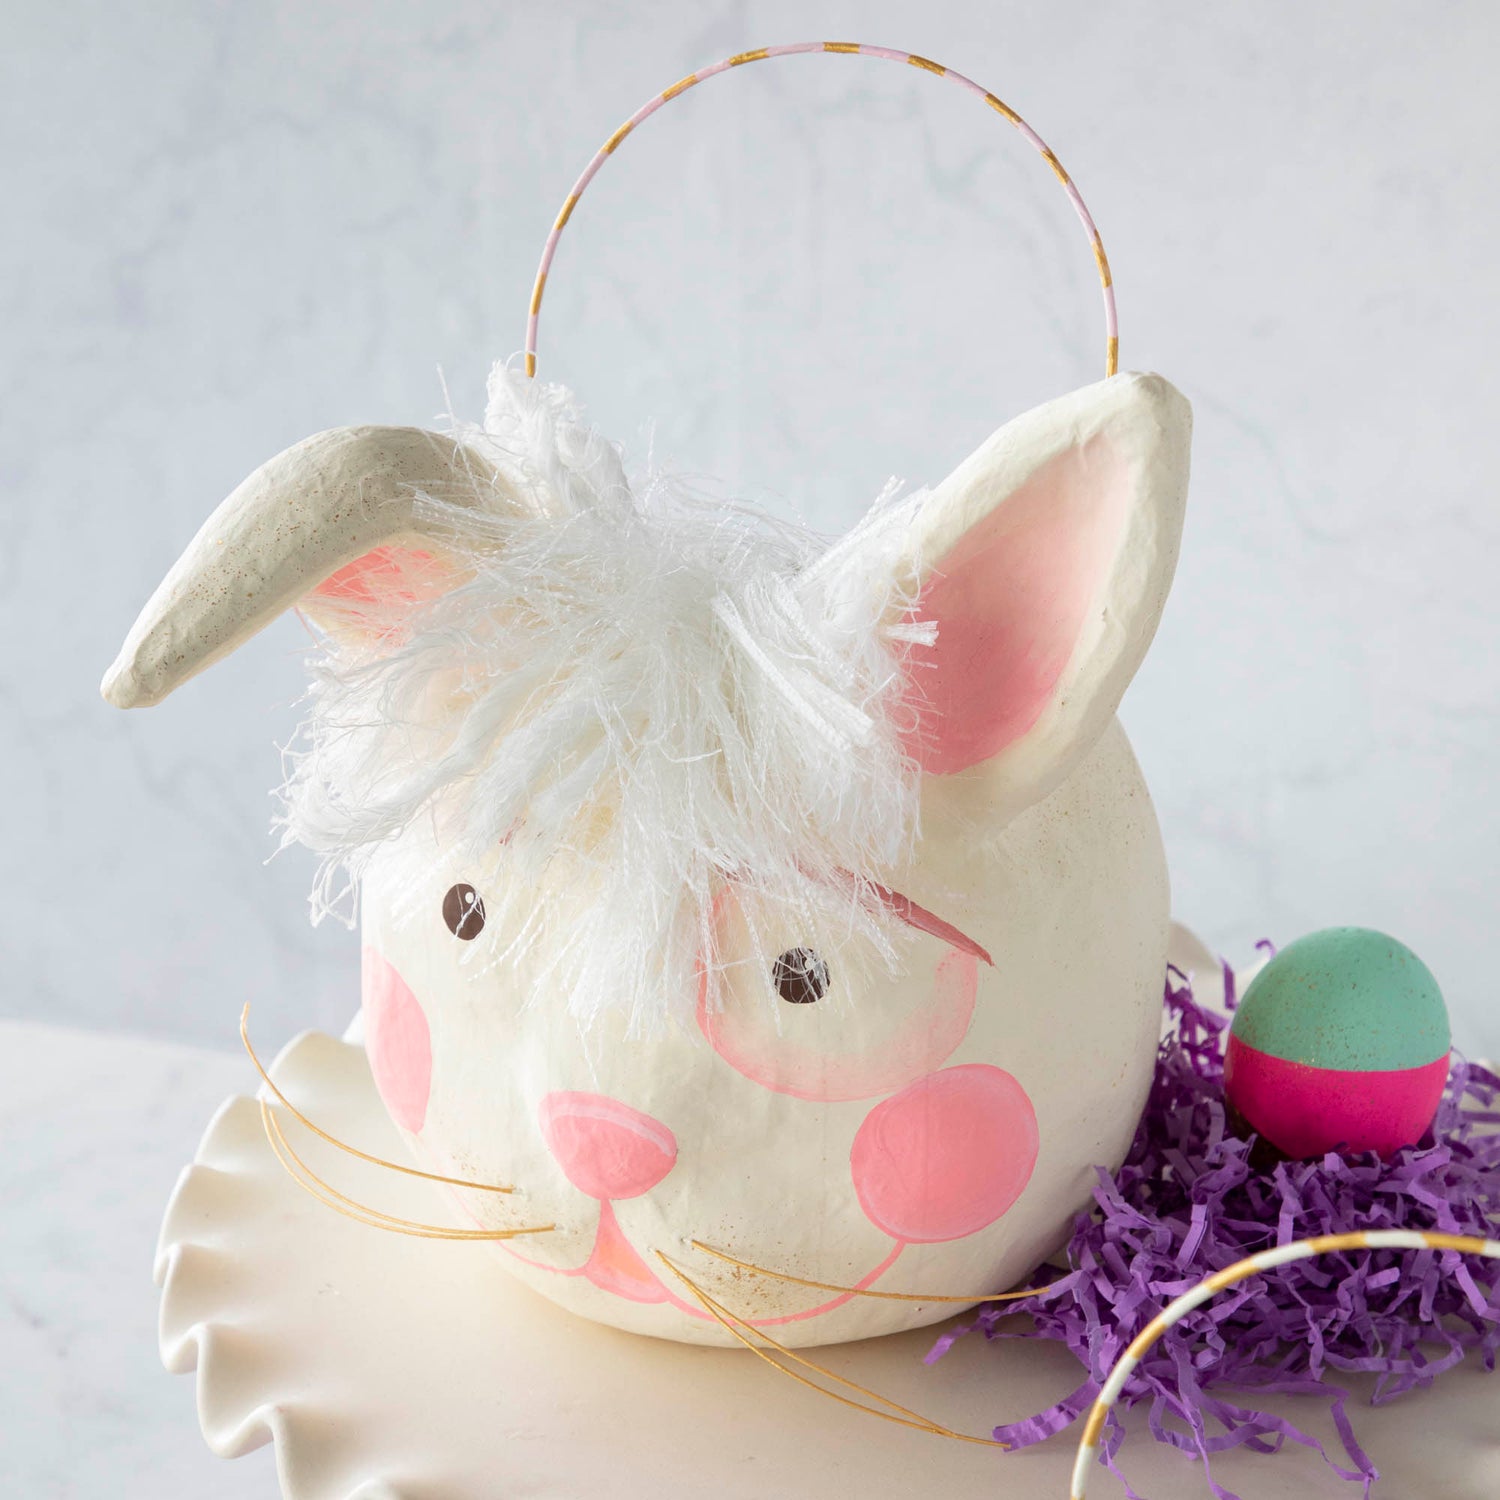 A Glitterville Papermache Easter Bucket on a cake stand, perfect for Easter fun and spring decor.